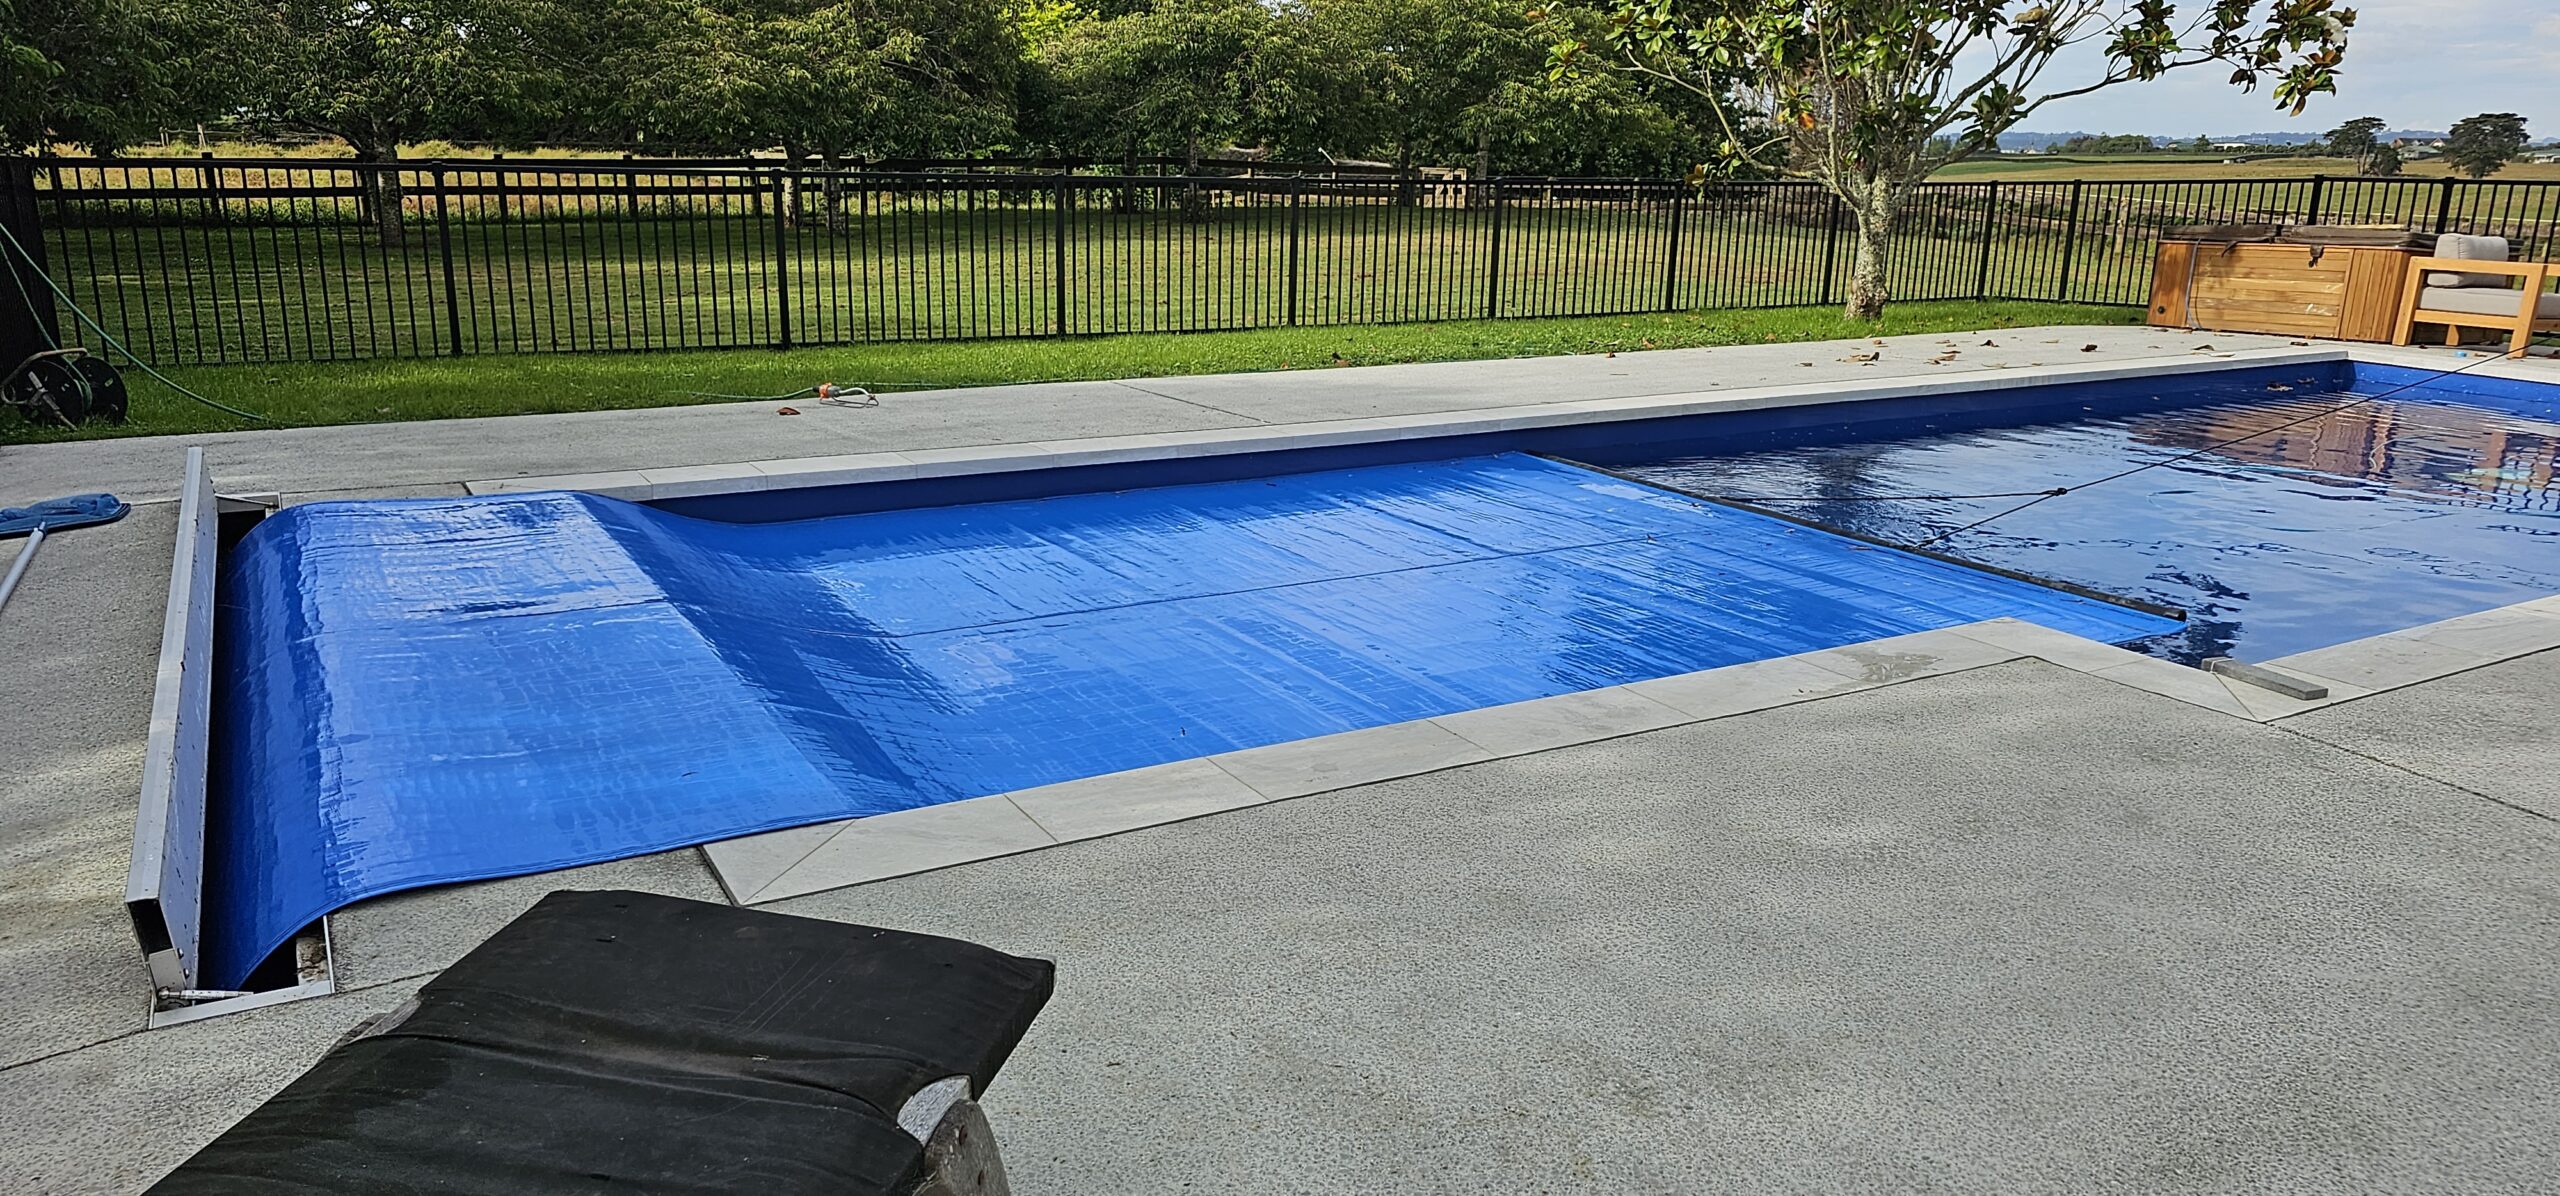 photo of a inground pool cover system for swimming pools